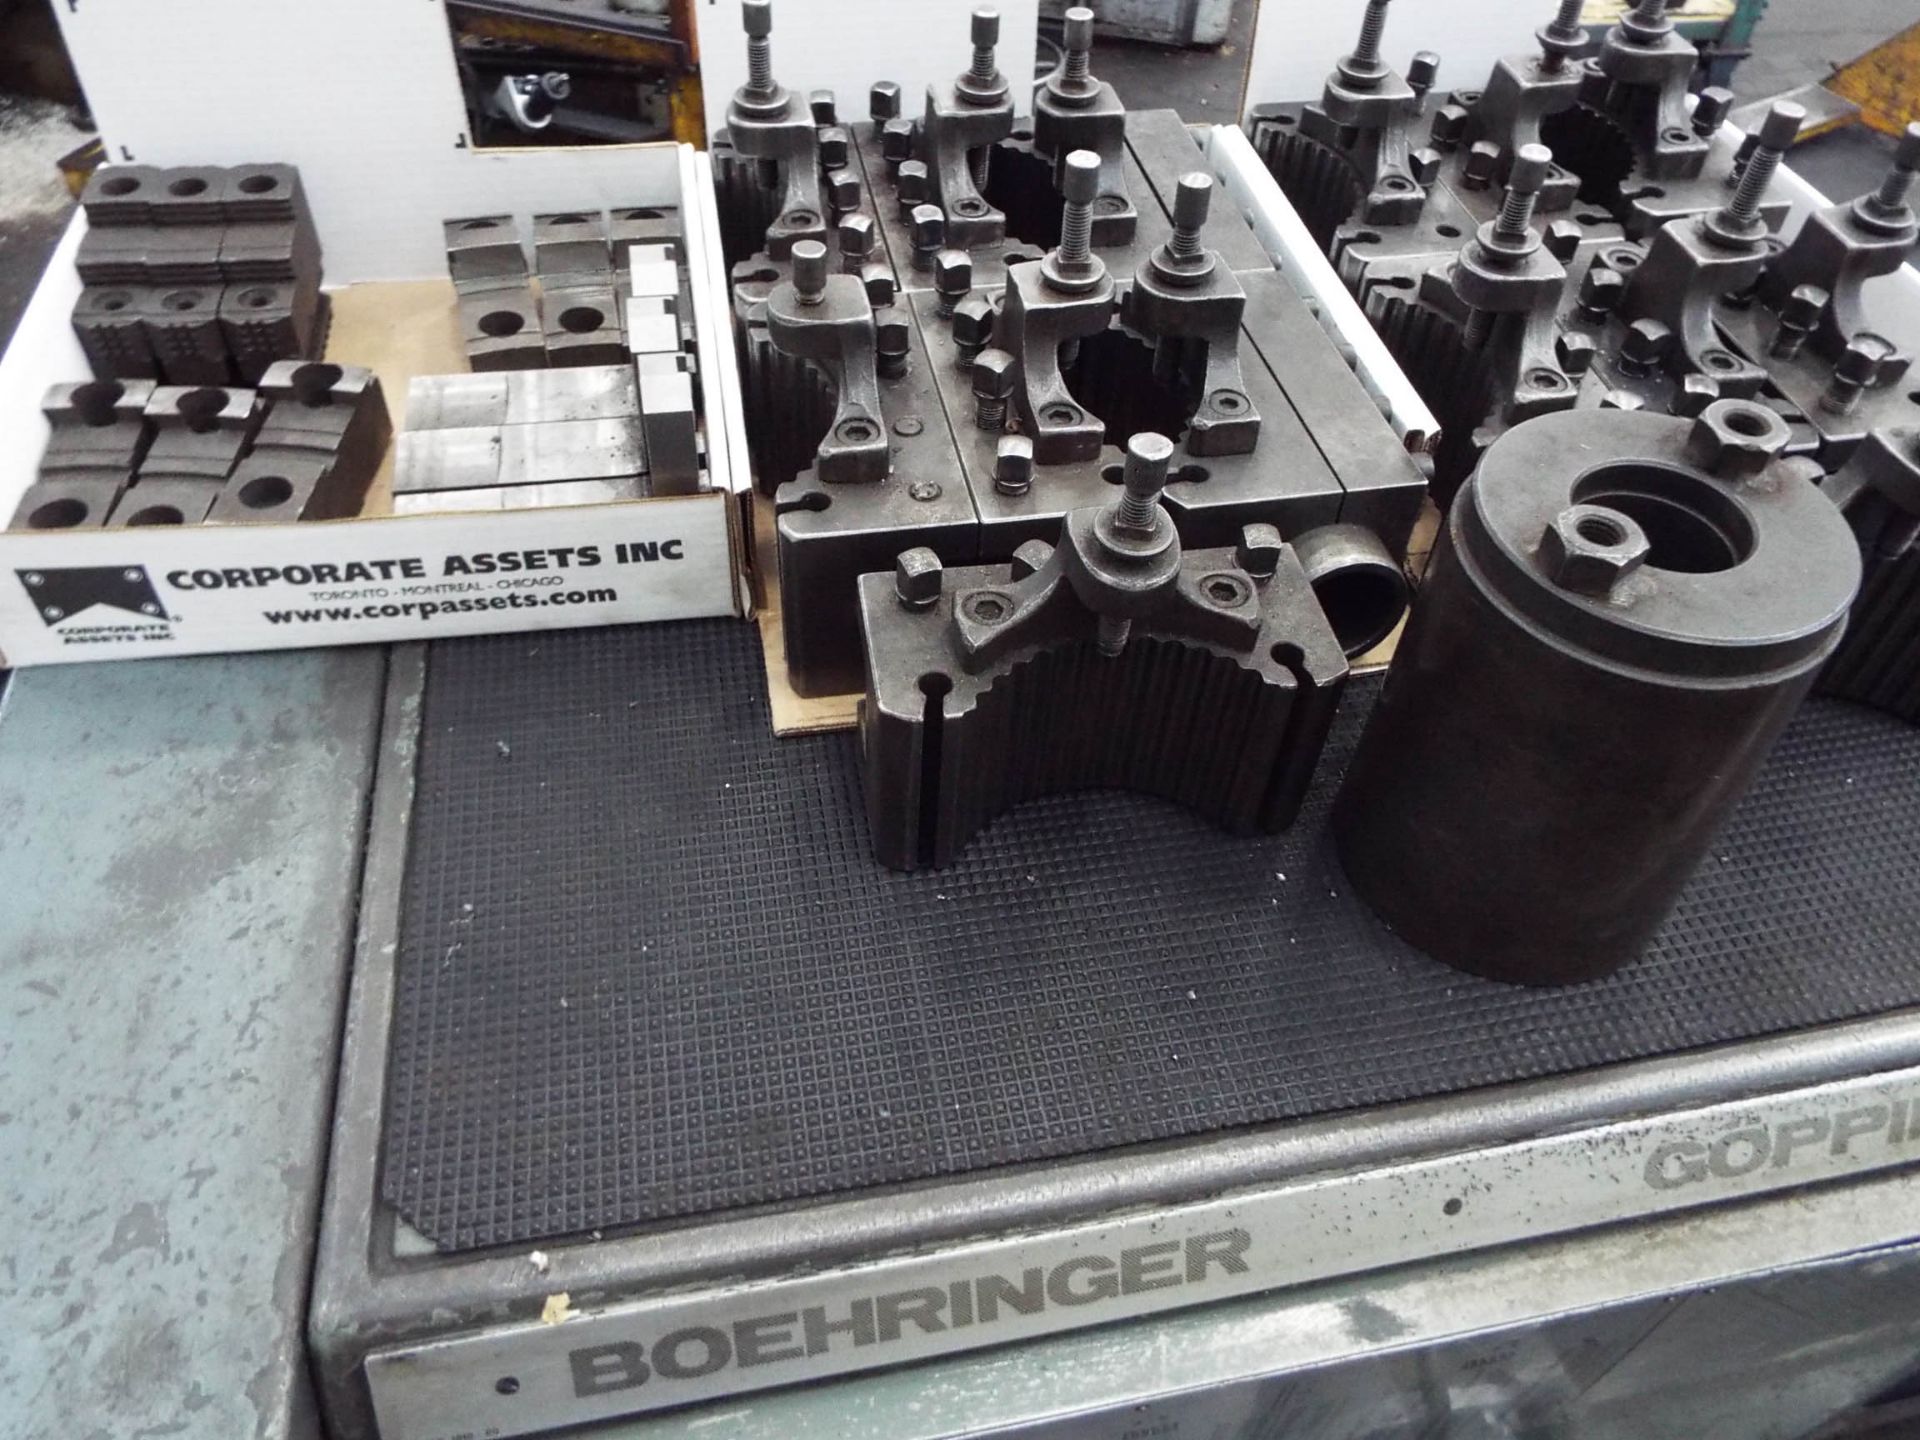 BOEHRINGER GOPPINGEN VDF LATHE WITH, 31" SWING OVER BED, 107" DISTANCE BETWEEN CENTERS, 5" SPINDLE - Image 12 of 14